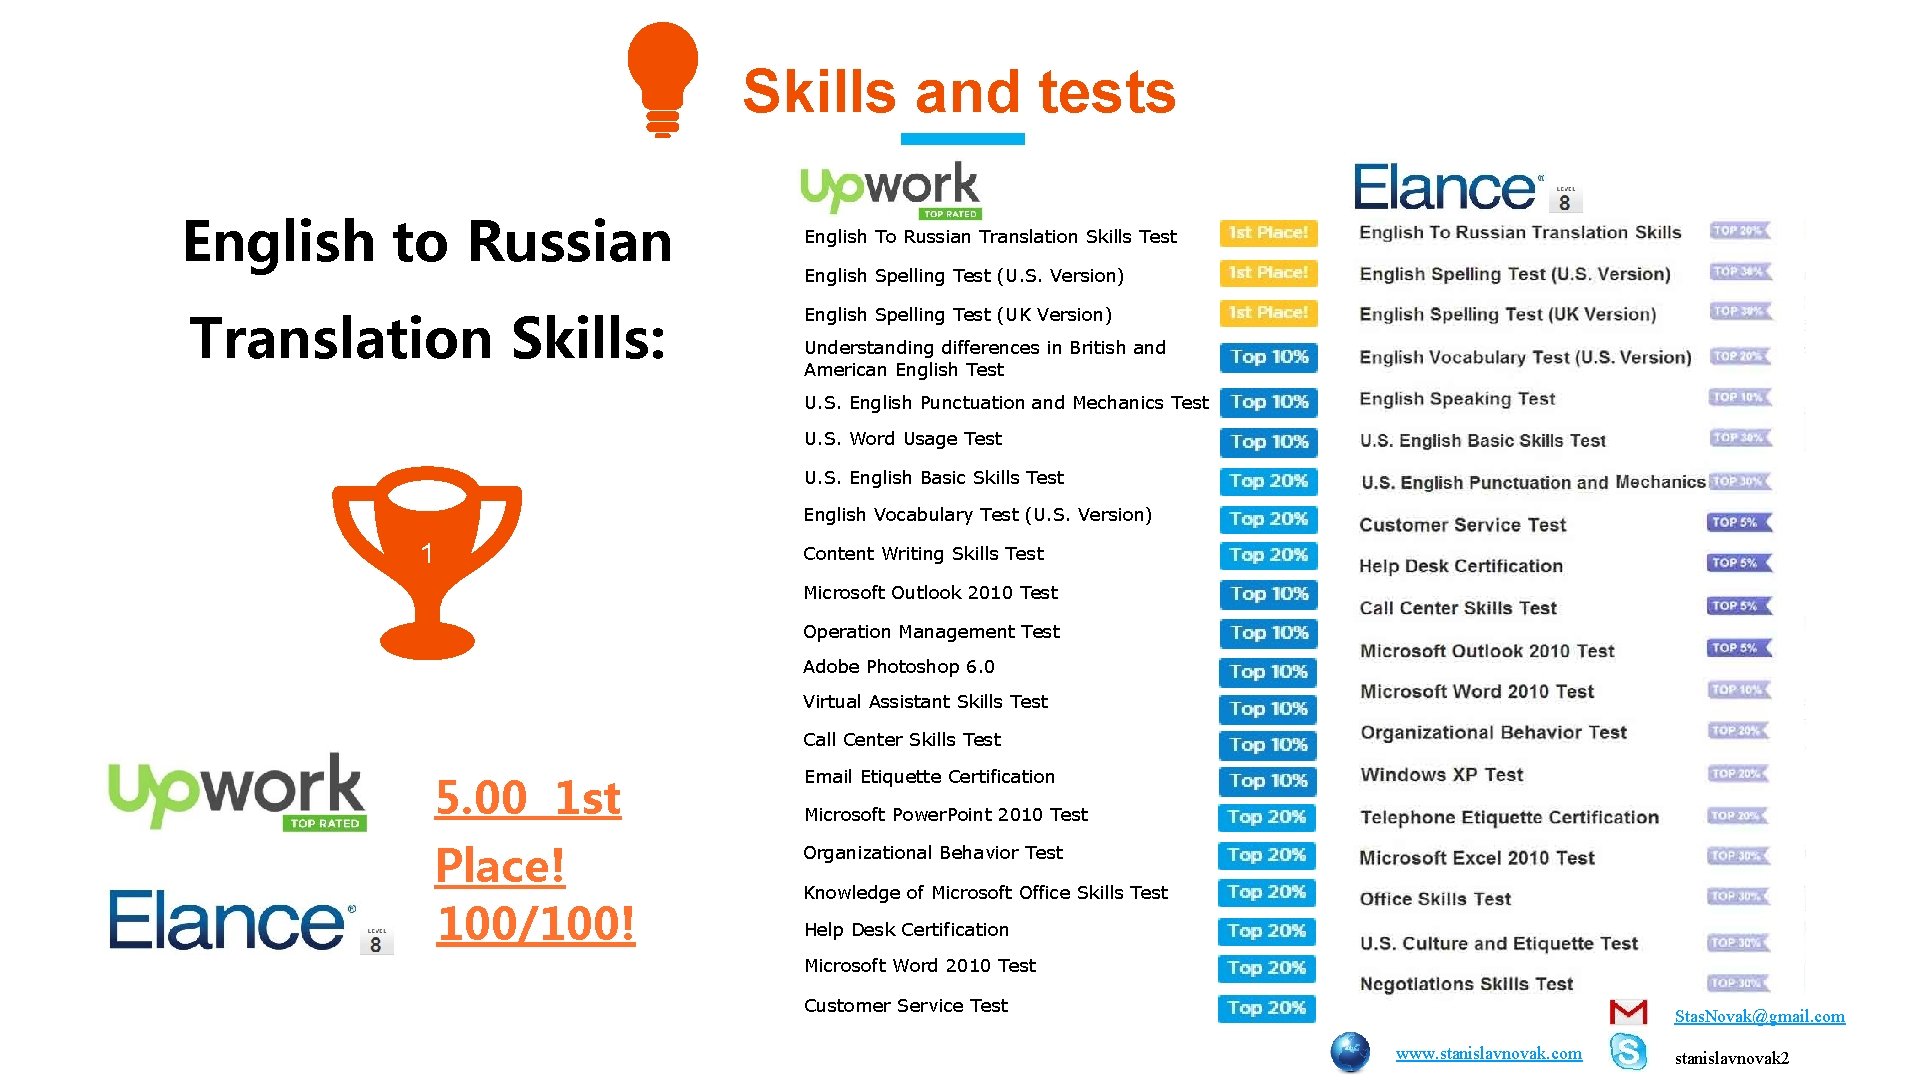 Skills and tests English to Russian Translation Skills: English To Russian Translation Skills Test